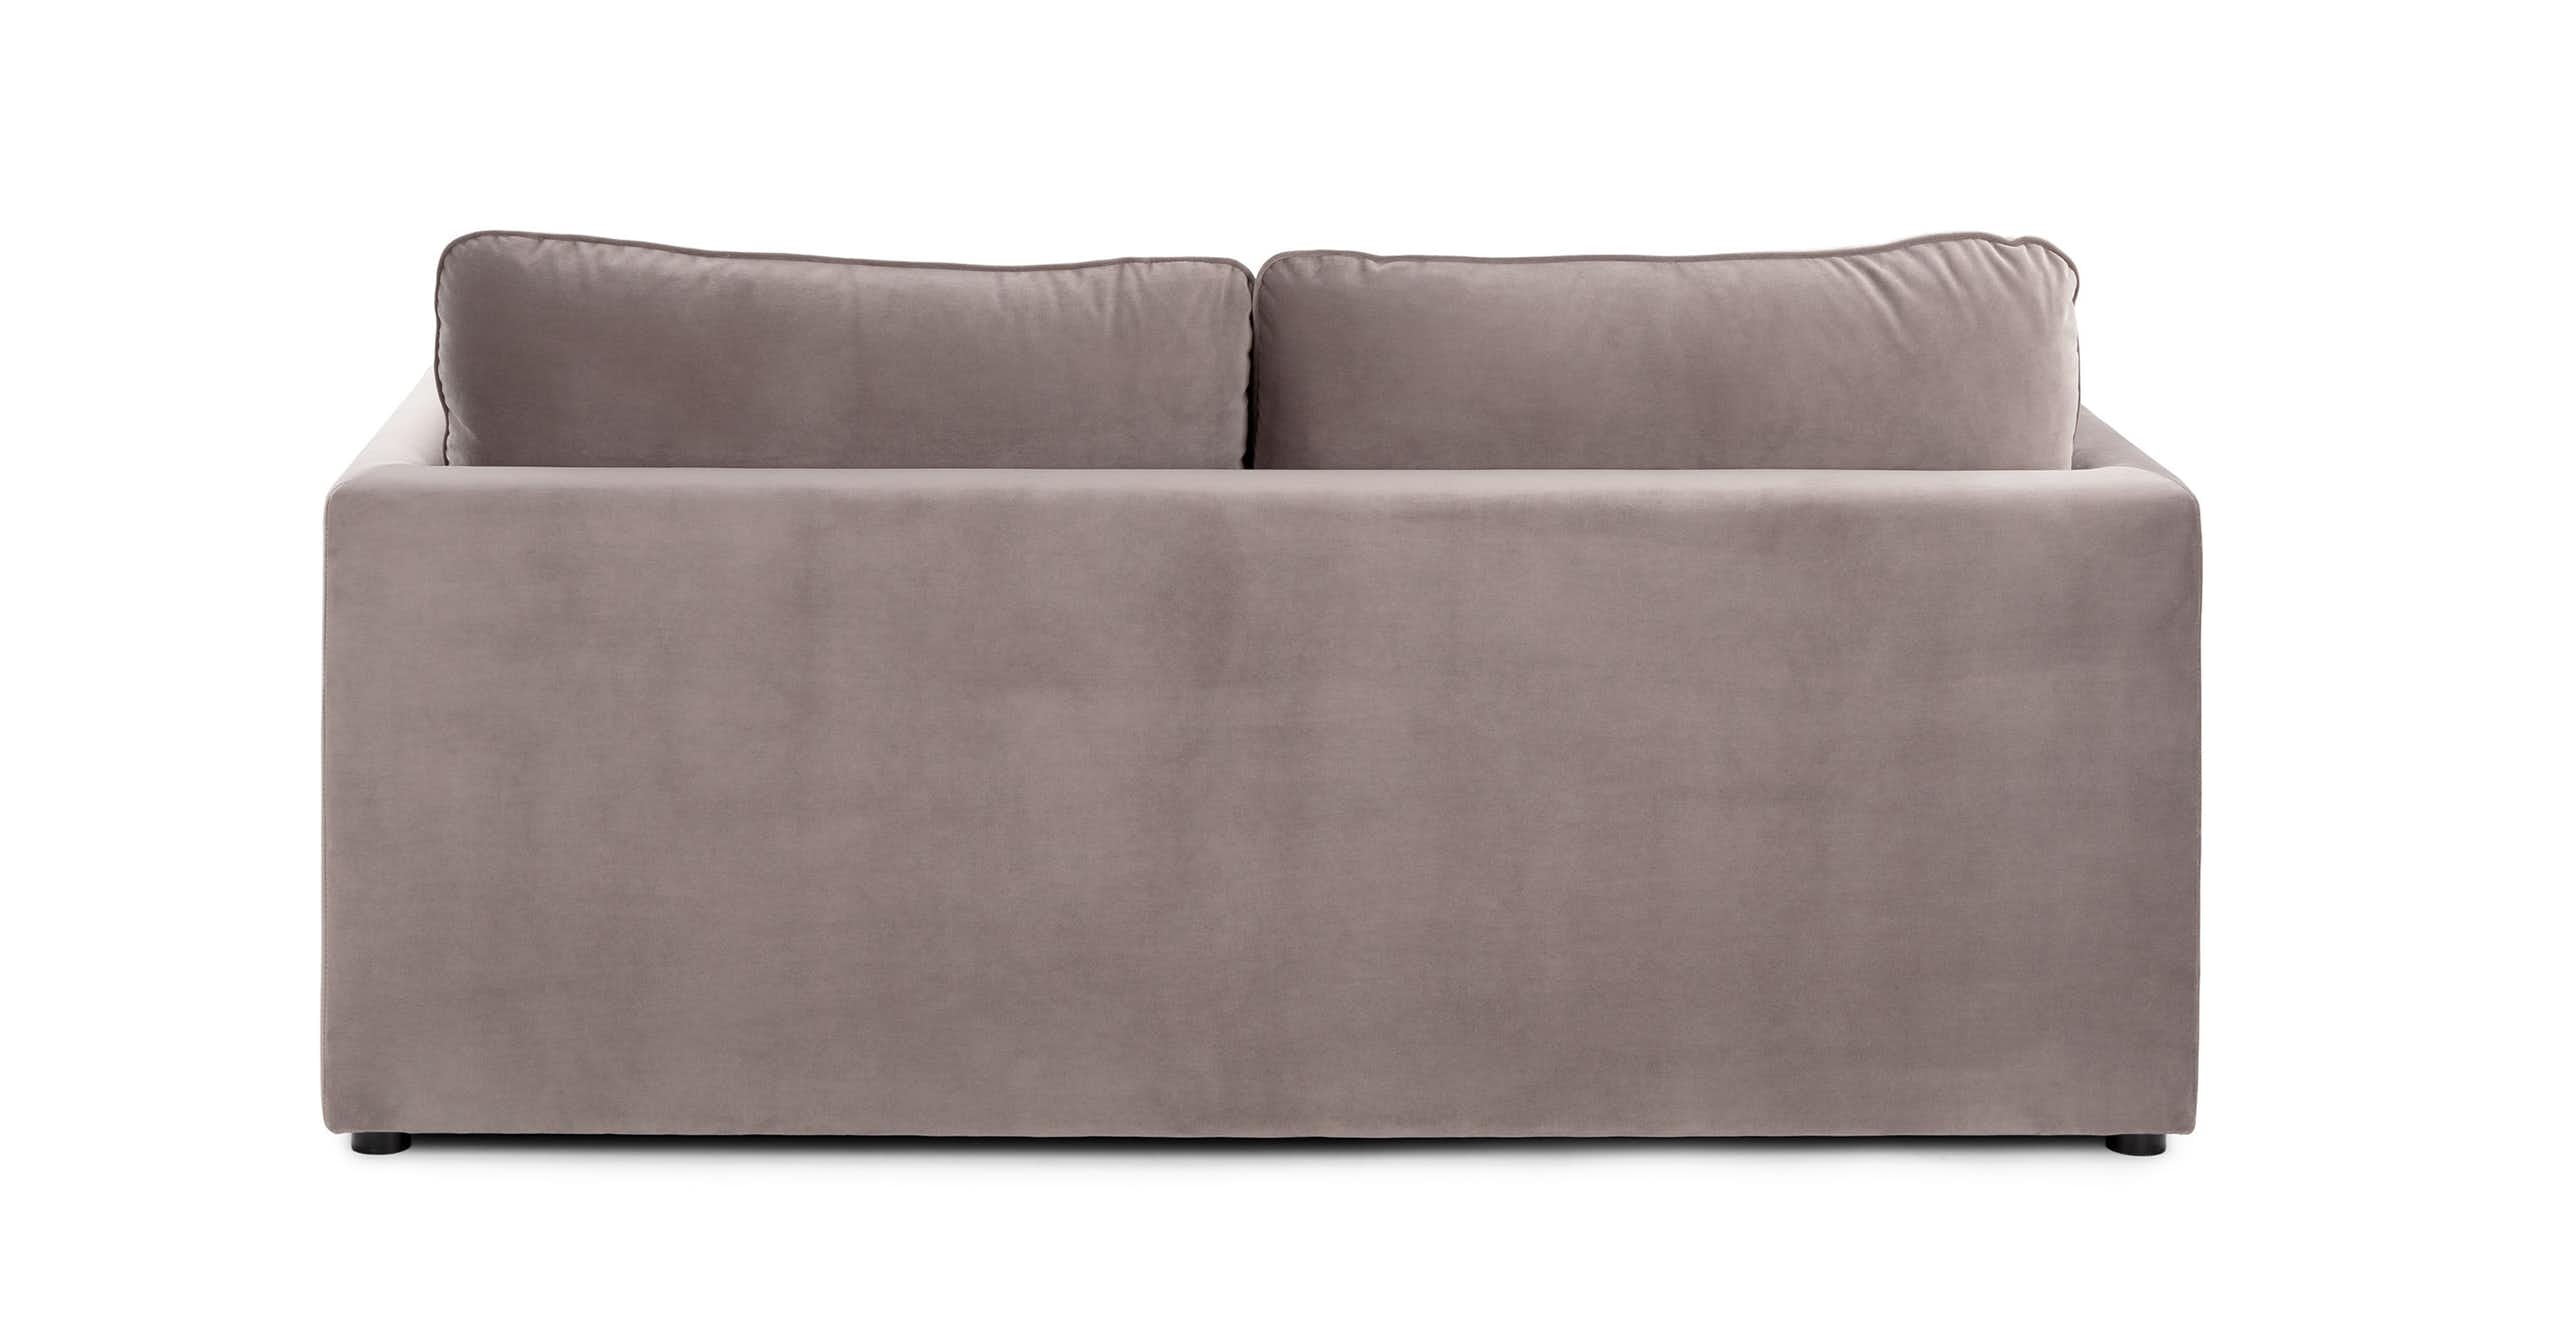 Oneira Dream Taupe Sofa Bed - Image 3